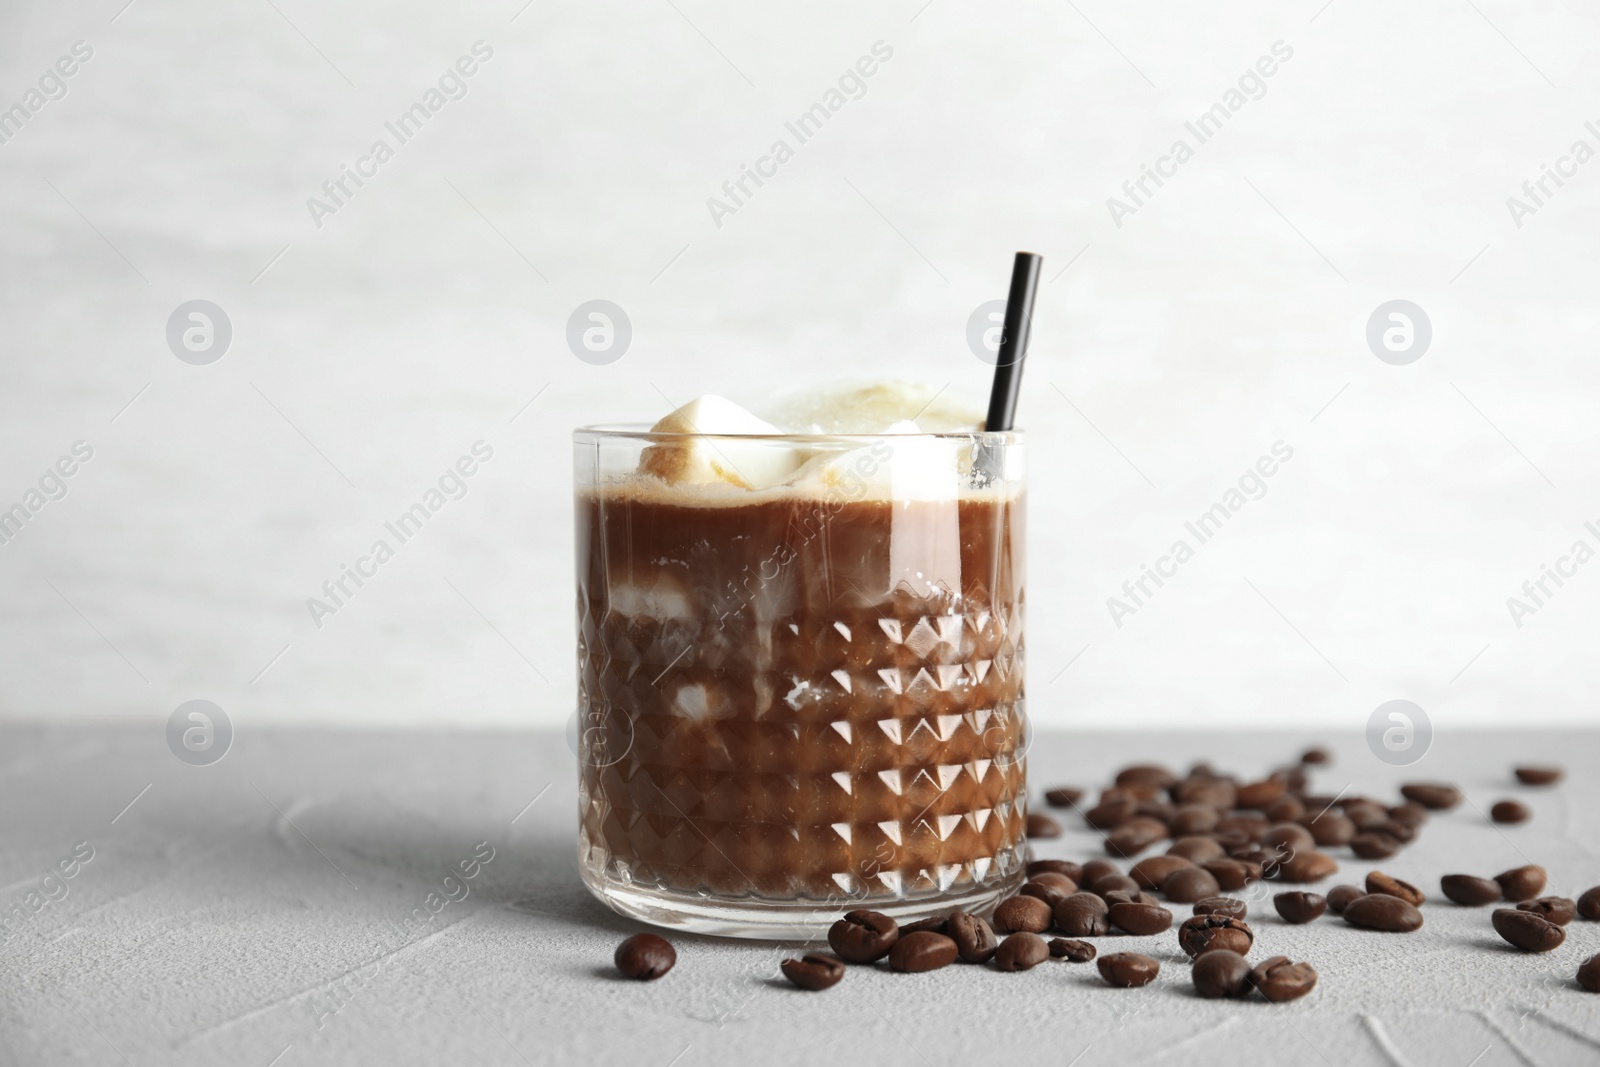 Photo of Coffee drink with milk ice cubes and beans on table against light background